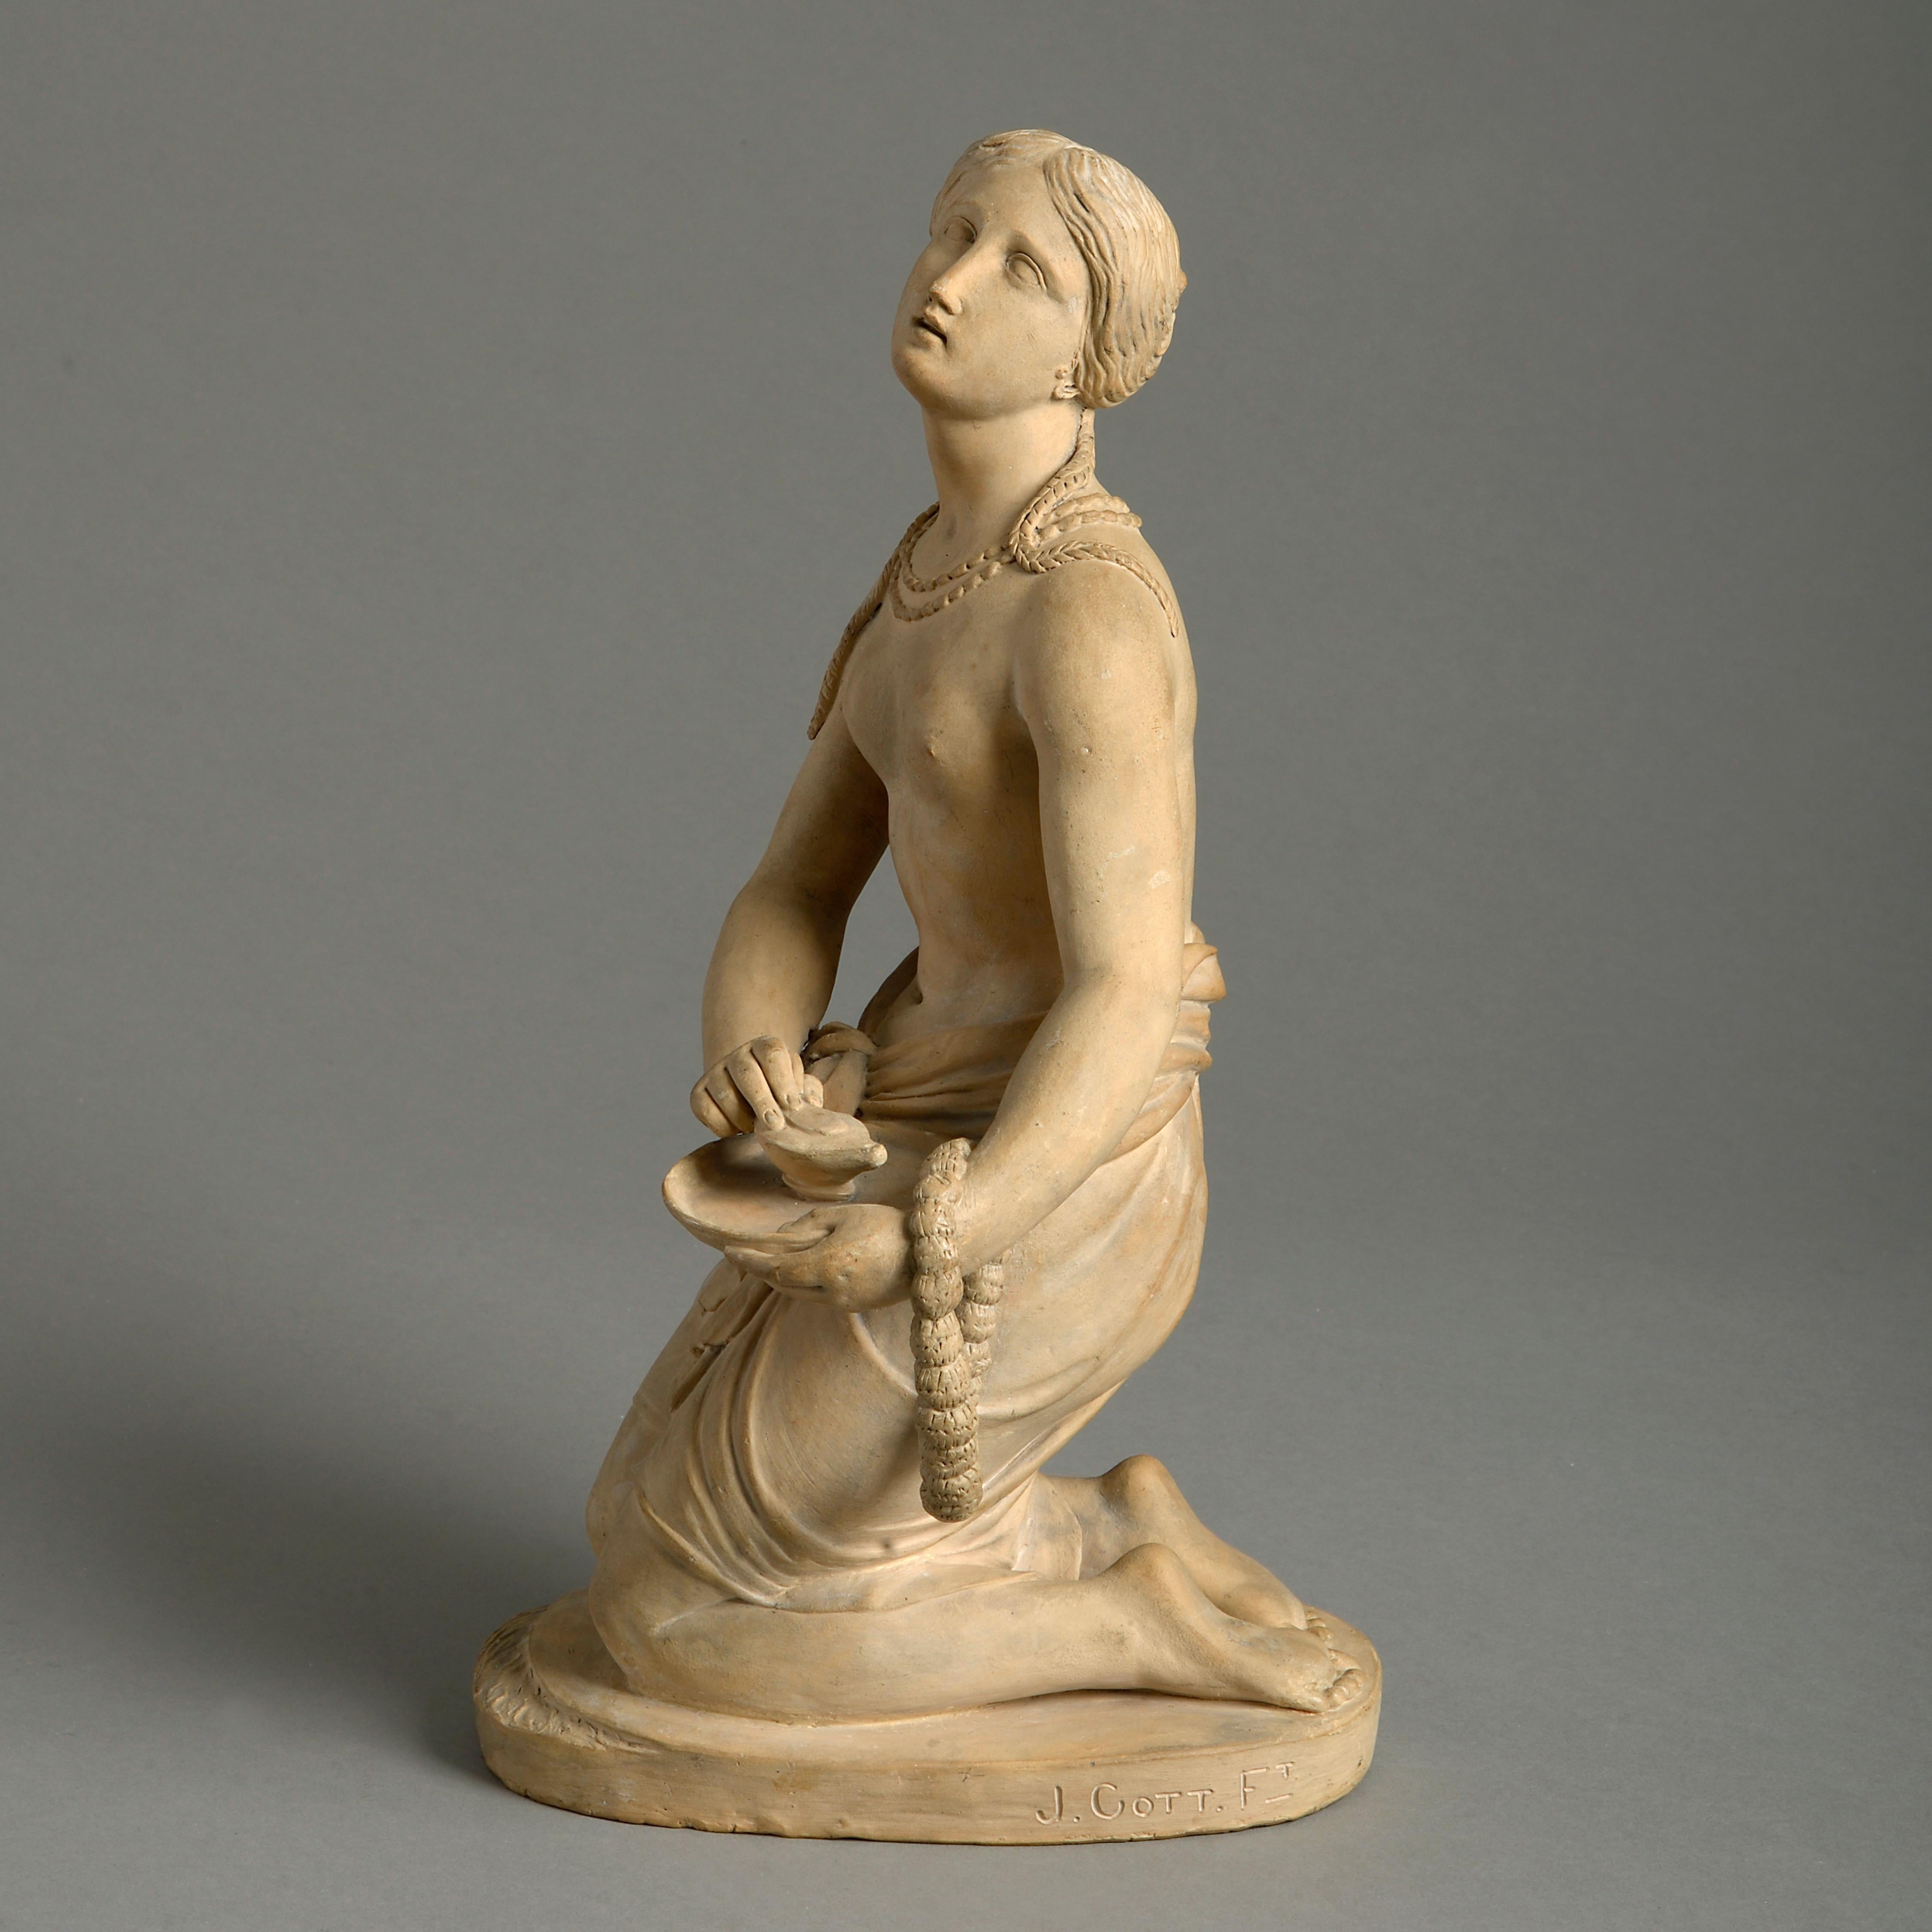 Joseph Gott (1785-1860)
'A Hindu Woman Placing a Lamp on the Ganges’

Terracotta

Measures: 13.5in. (34cm) high

This terracotta figure is a finished study for the marble version, sold Christie’s, London, 28 September 1989. The marble was